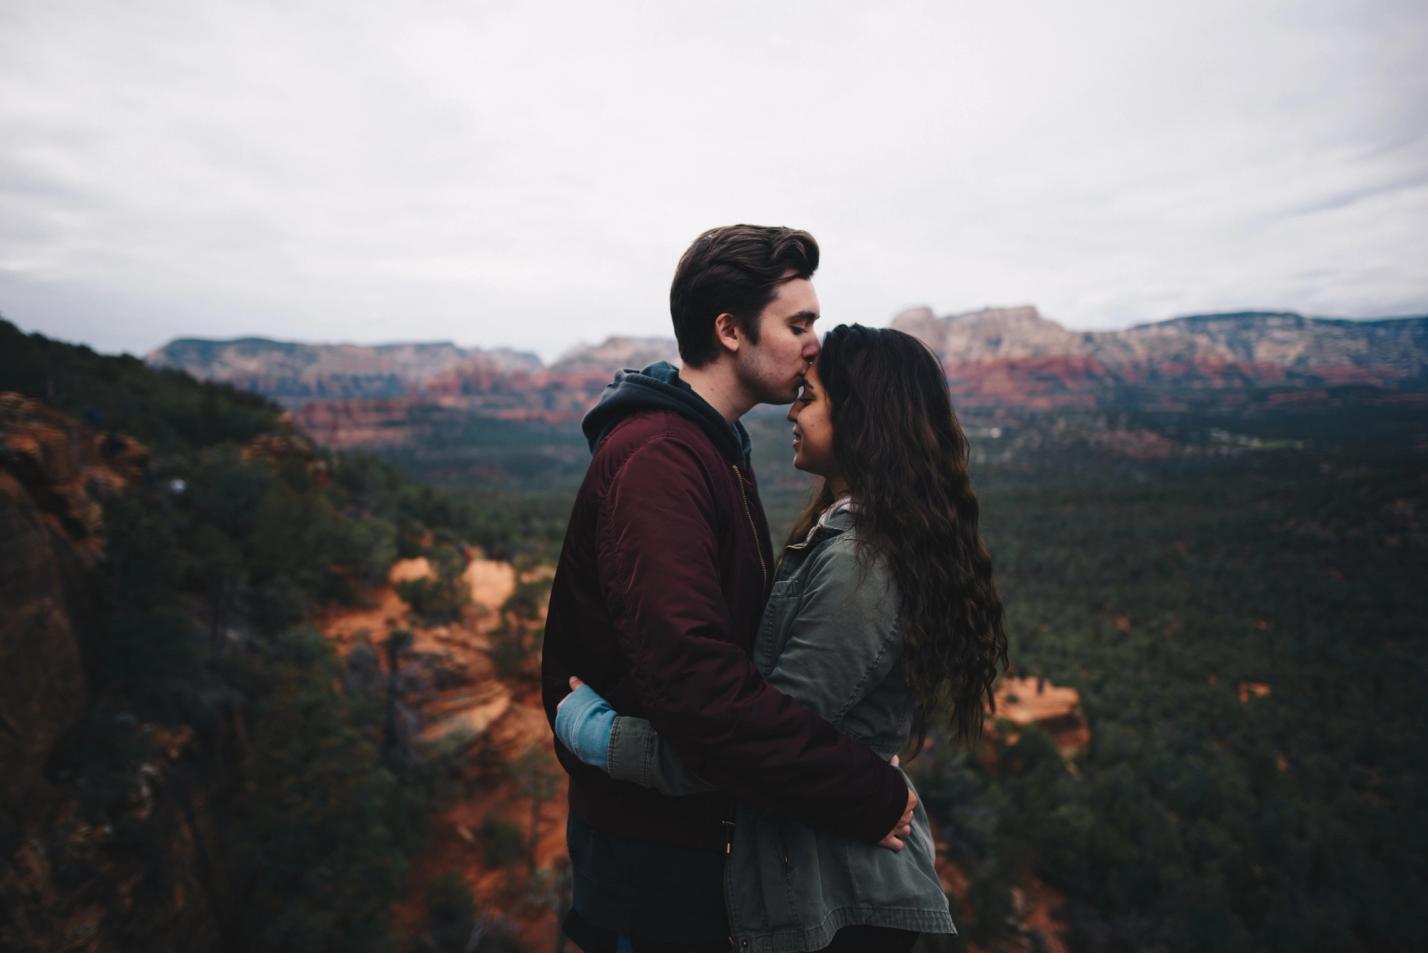 Photo by Nathan McBride on Unsplash. Picturing a couple holding around each other with a mountain view in the background.